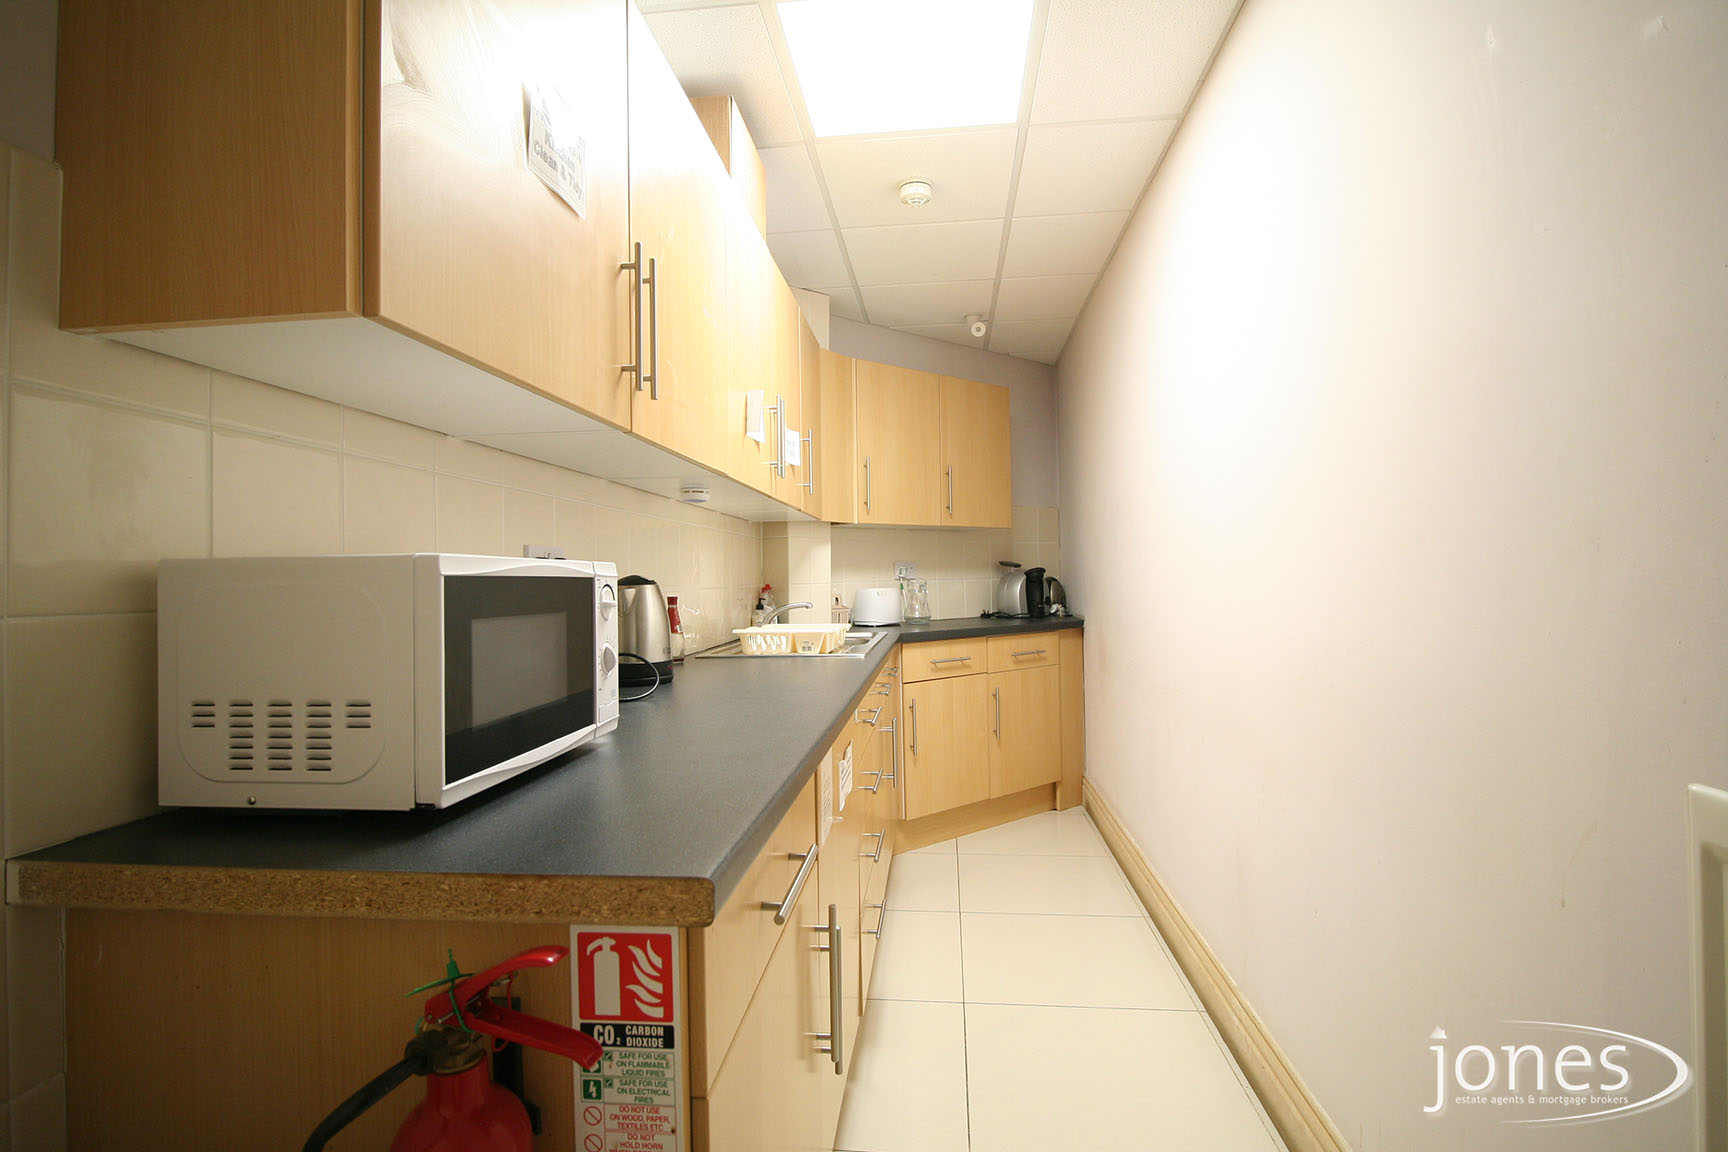 Home for Sale Let - Photo 06 Durham Tees Valley Business Centre, Orde Wingate Way,Stockton on Tees, TS19